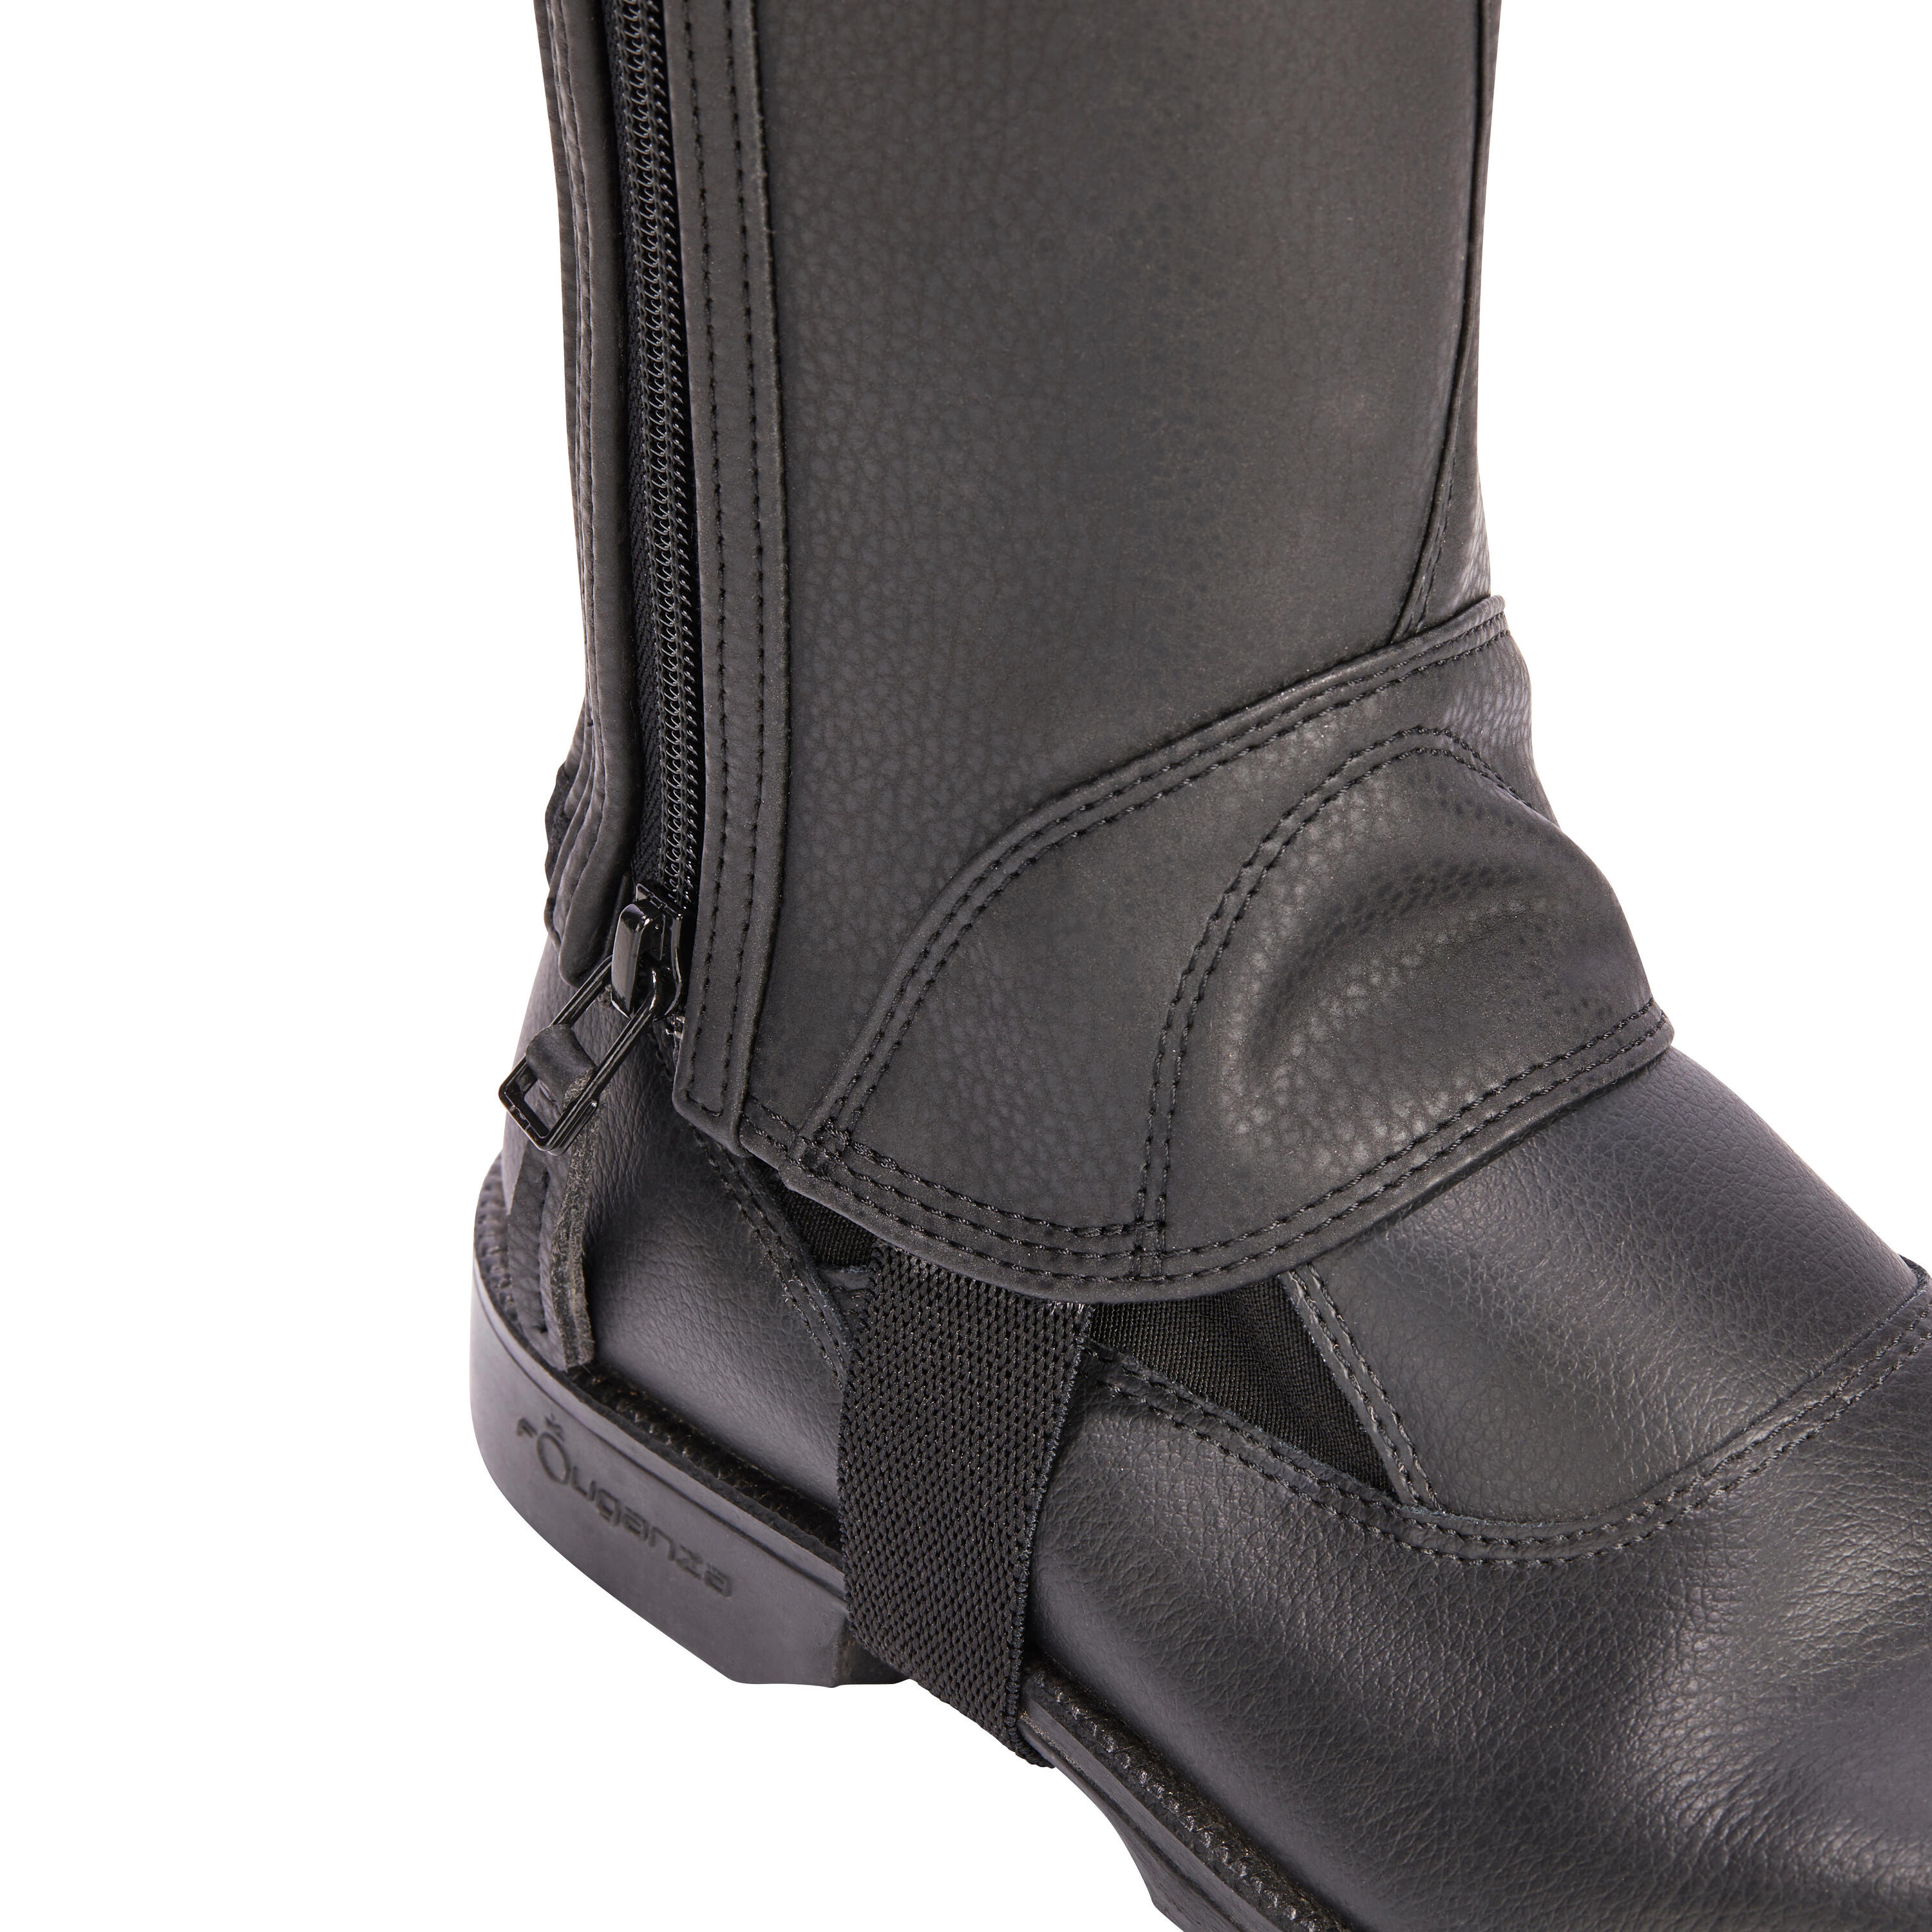 Kids' Horse Riding Leather Half-Chaps With Gusset 500 - Black 4/8